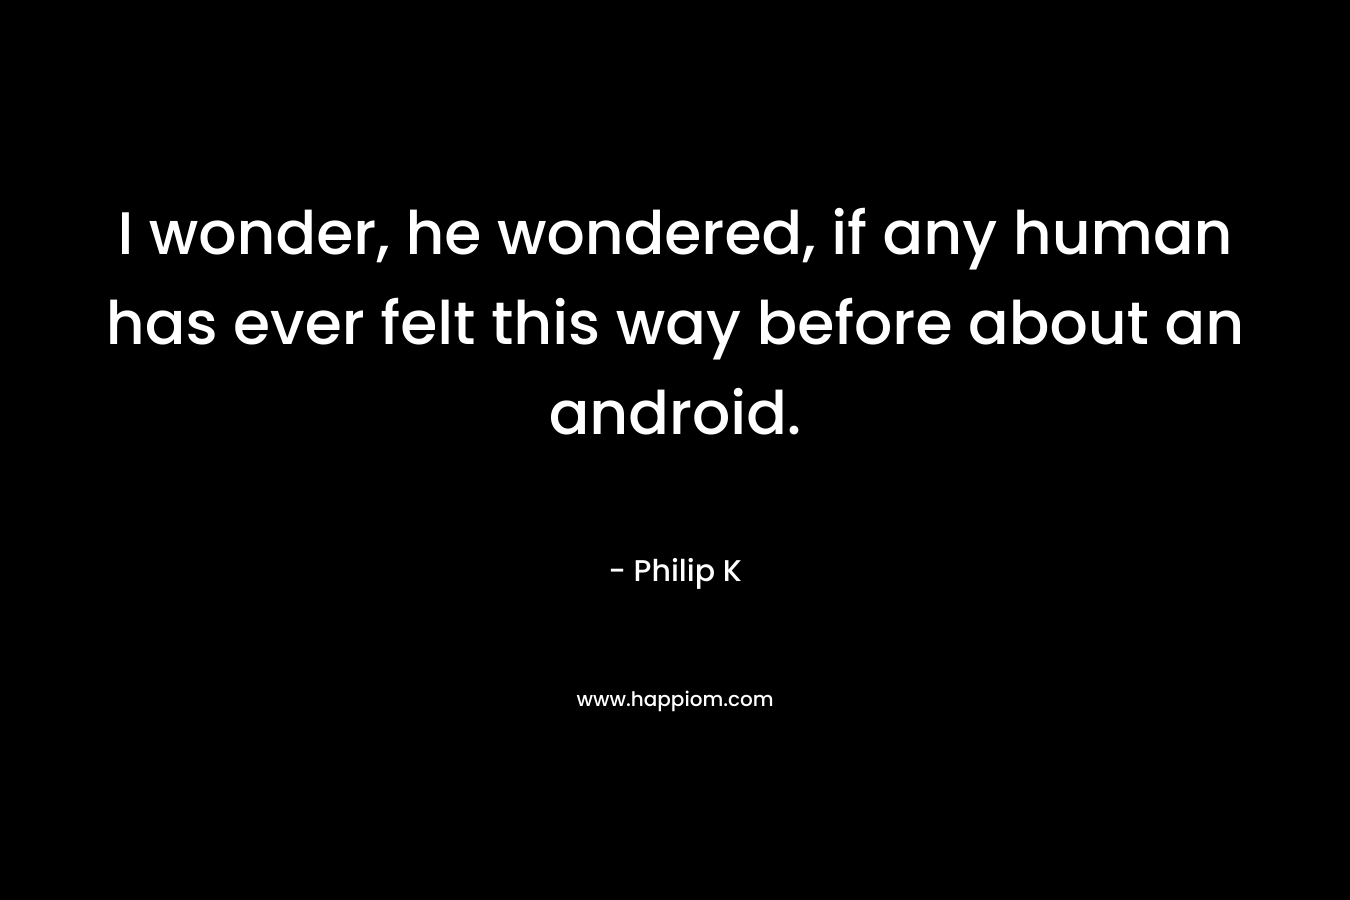 I wonder, he wondered, if any human has ever felt this way before about an android. – Philip K